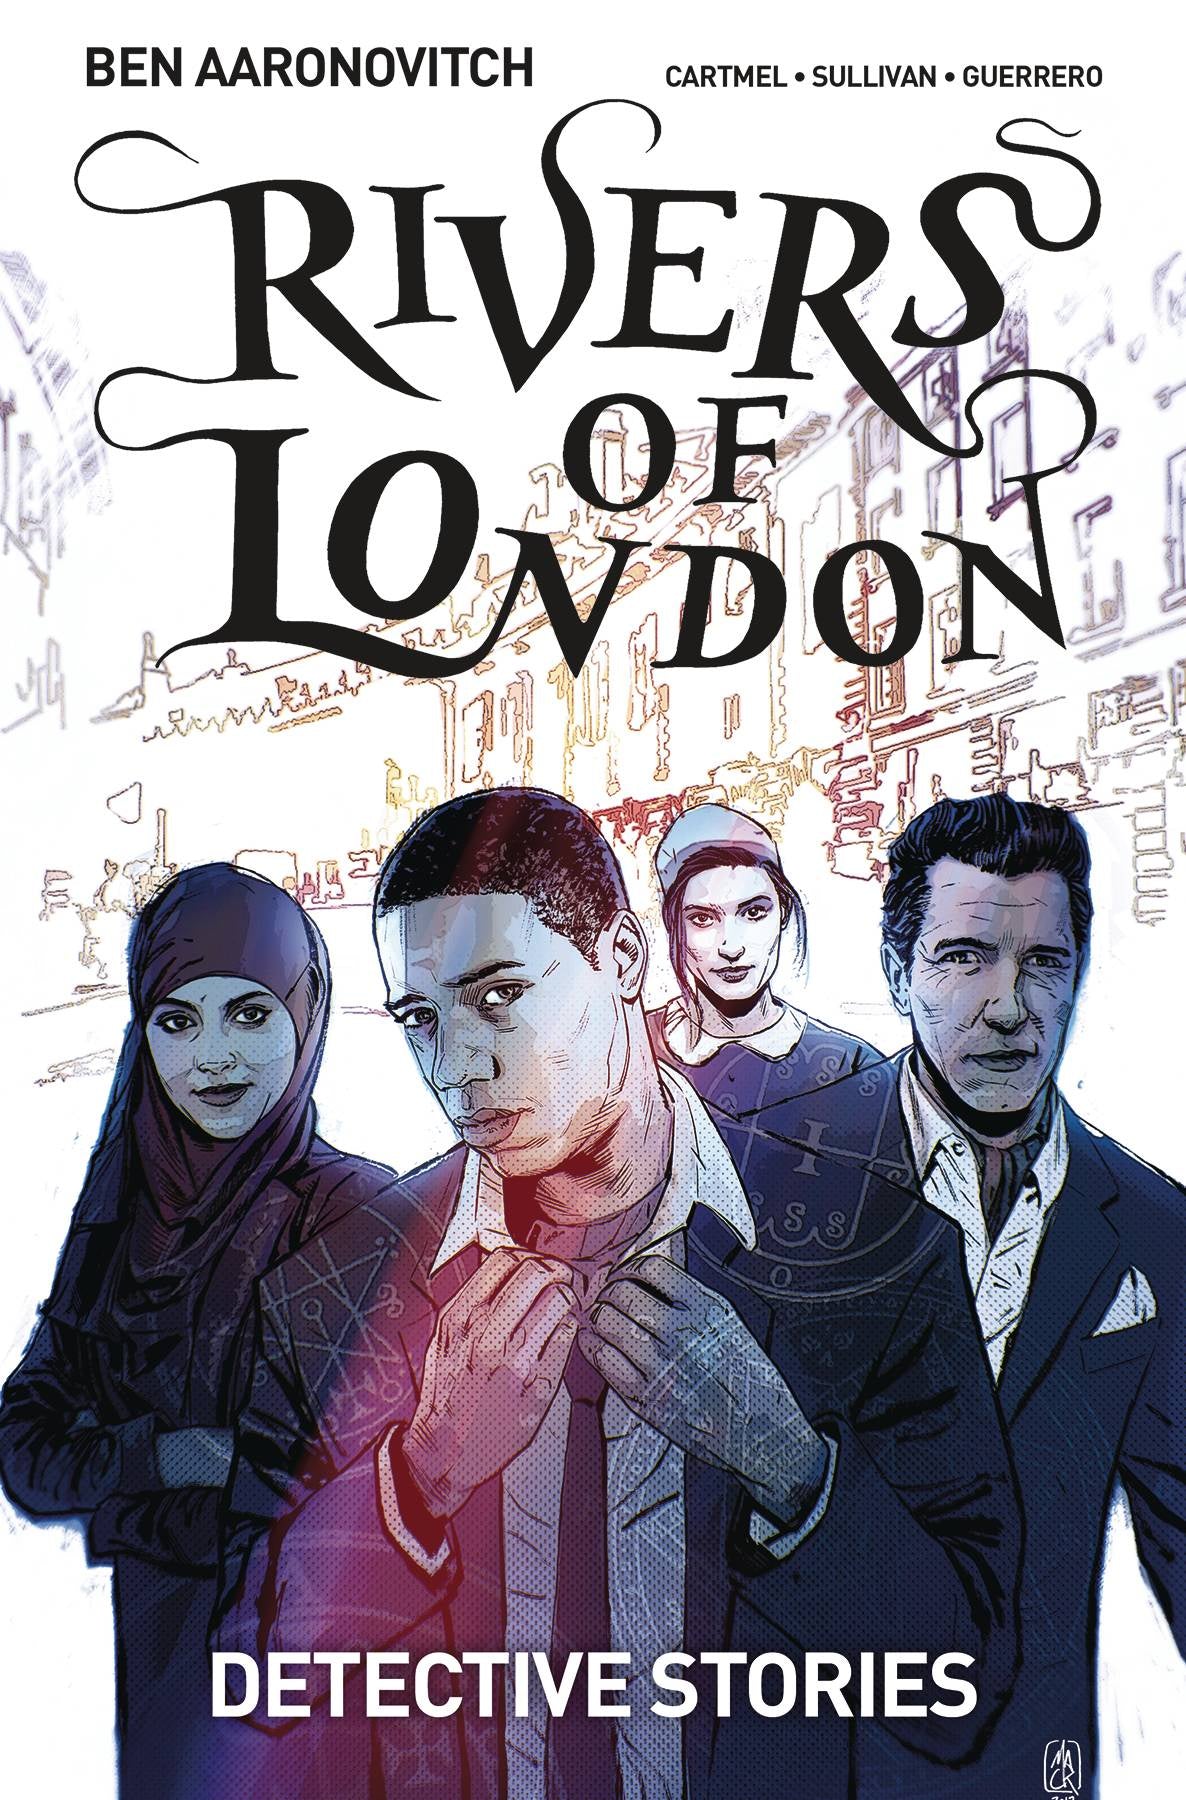 RIVERS OF LONDON DETECTIVE STORIES